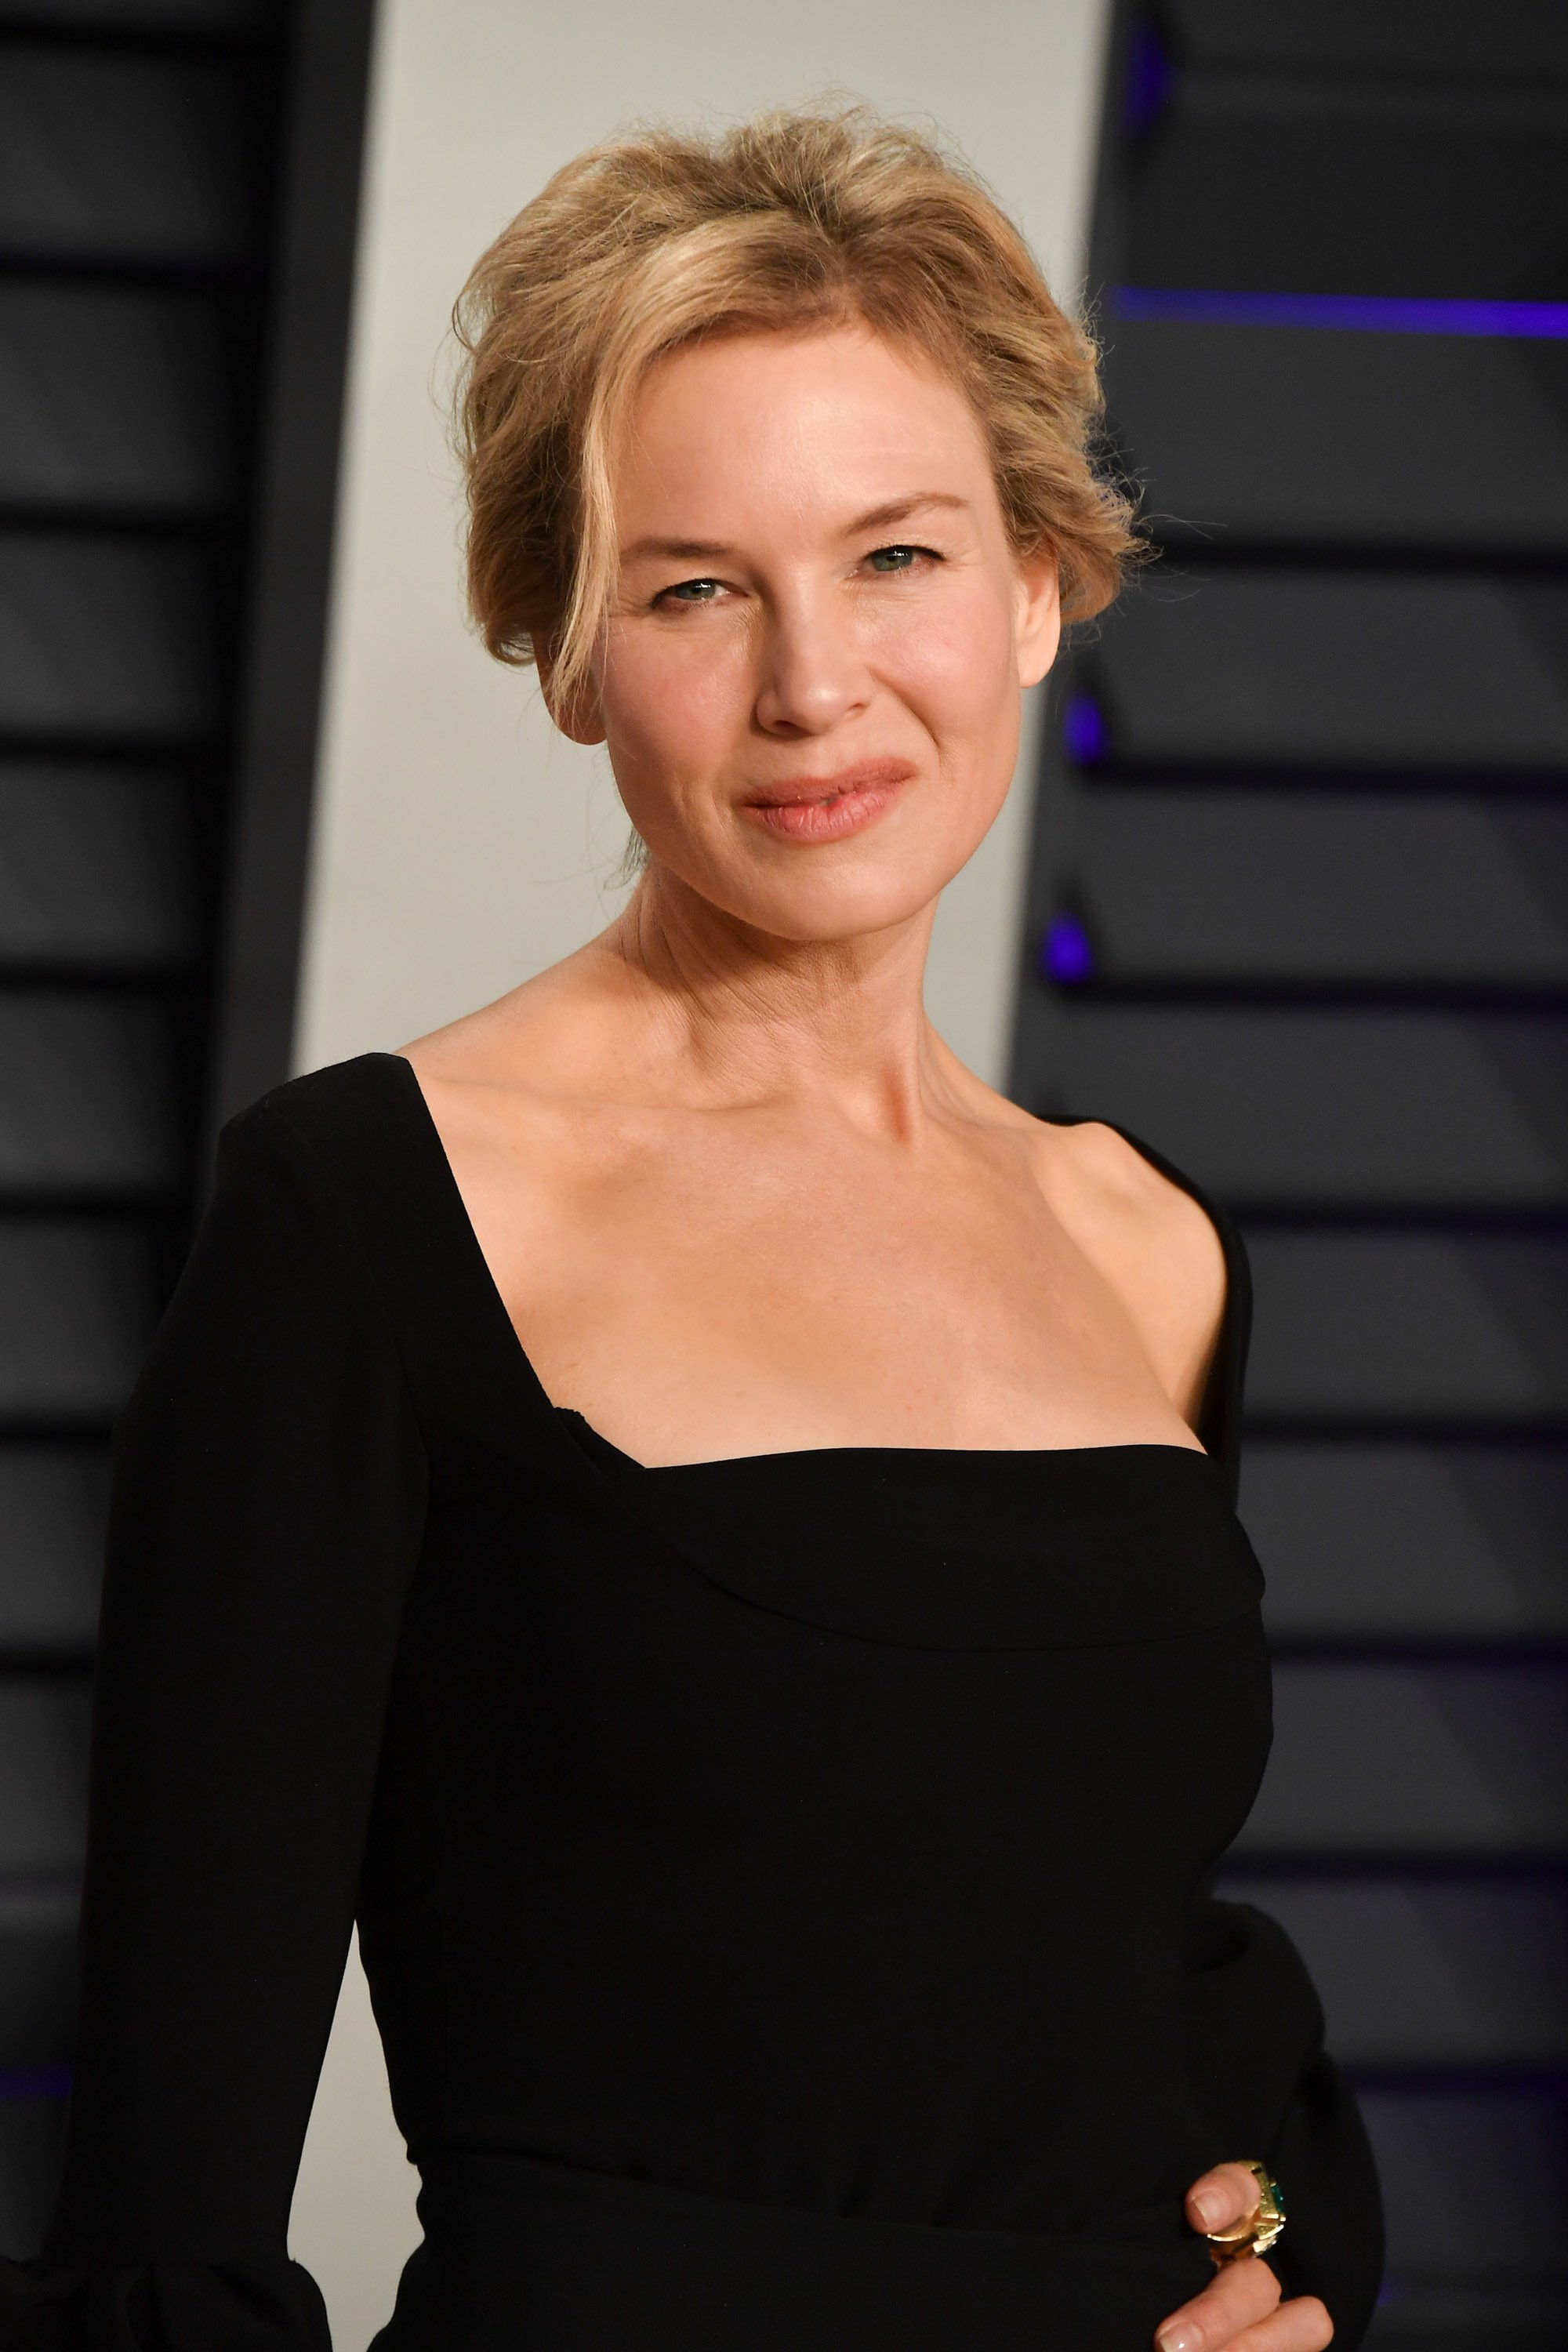 Renee Zellweger attends the 2019 Vanity Fair Oscar Party hosted by Radhika Jones at Wallis Annenberg Center for the Performing Arts on February 24, 201,9 in Beverly Hills, California. | Source: Getty Images.